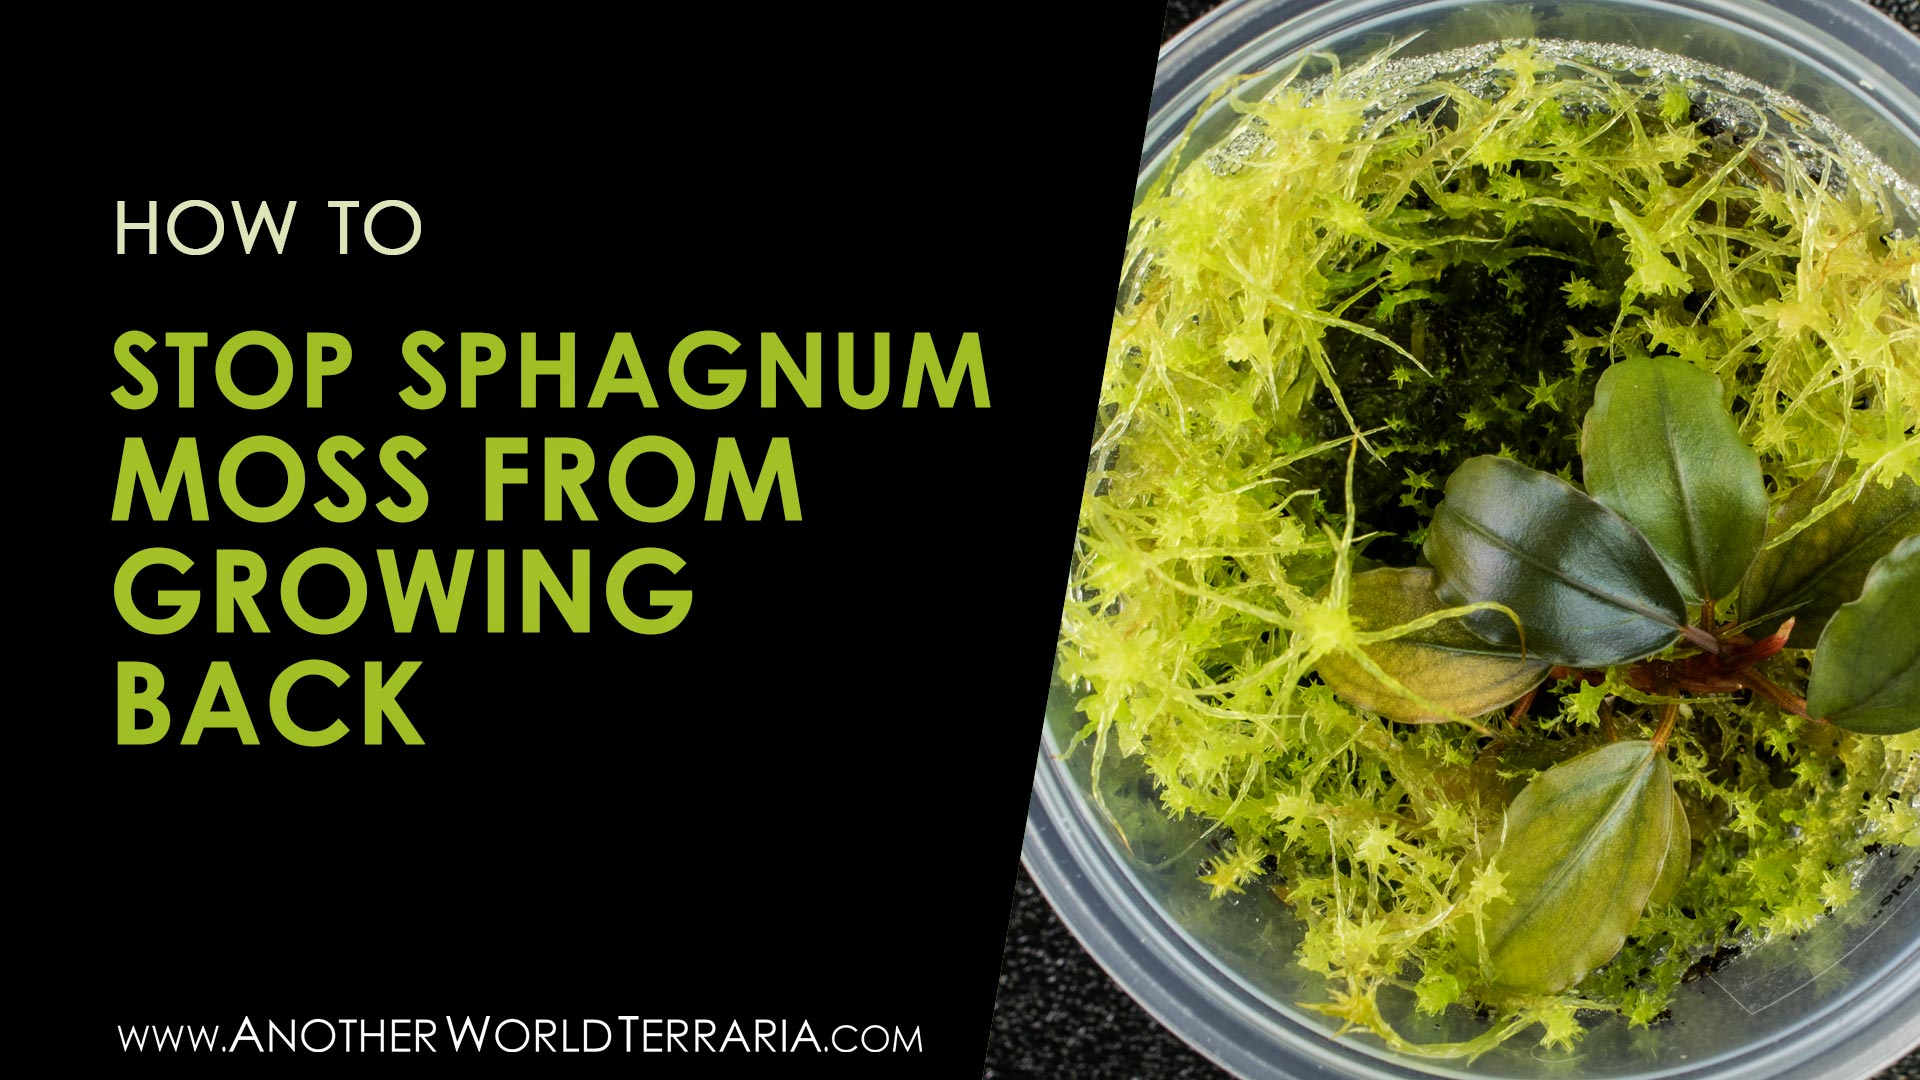 How to stop sphagnum moss from growing back